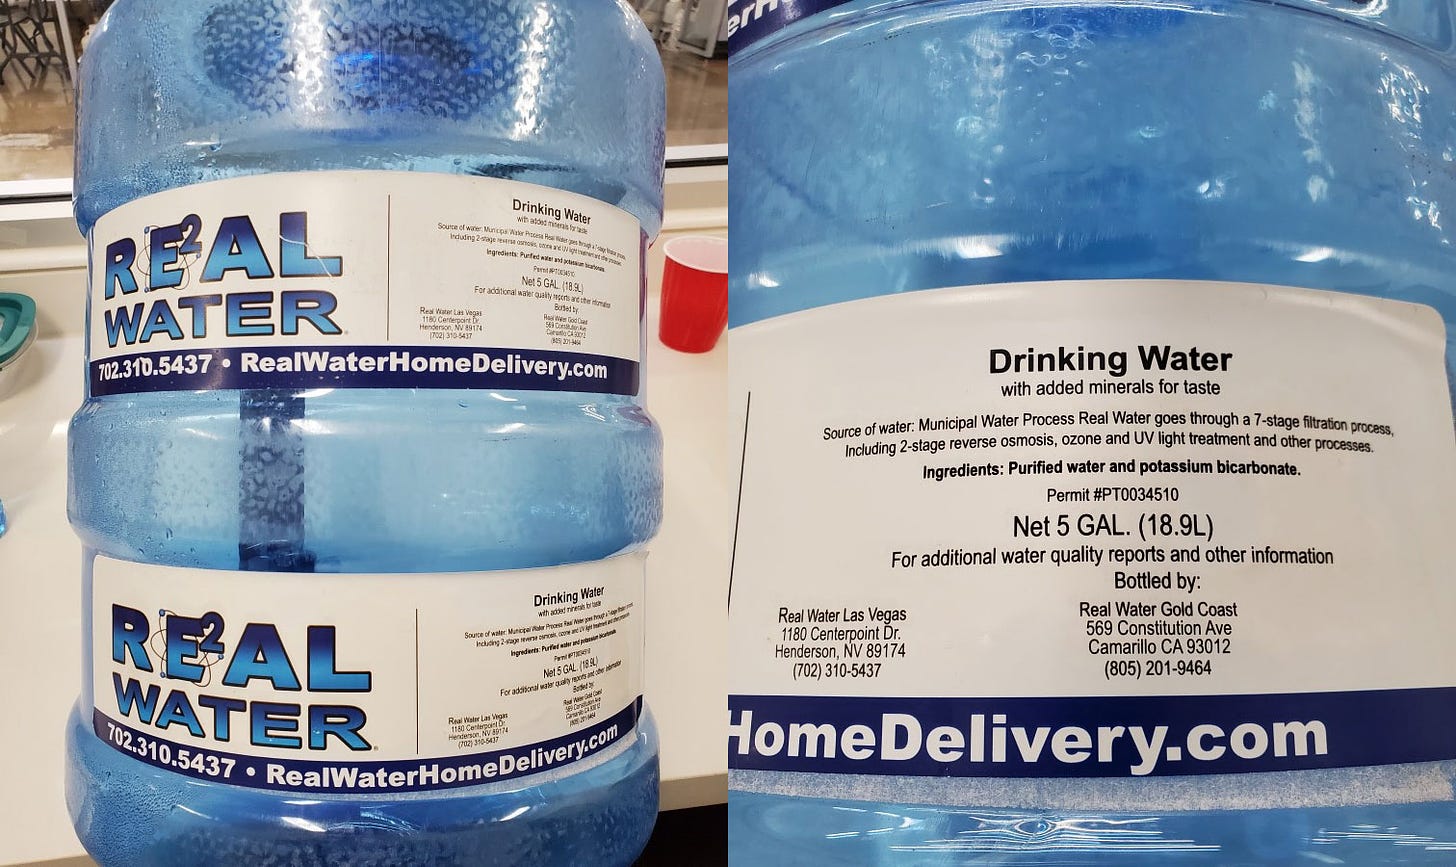 Pictures shows Real Water product that is being recalled. 